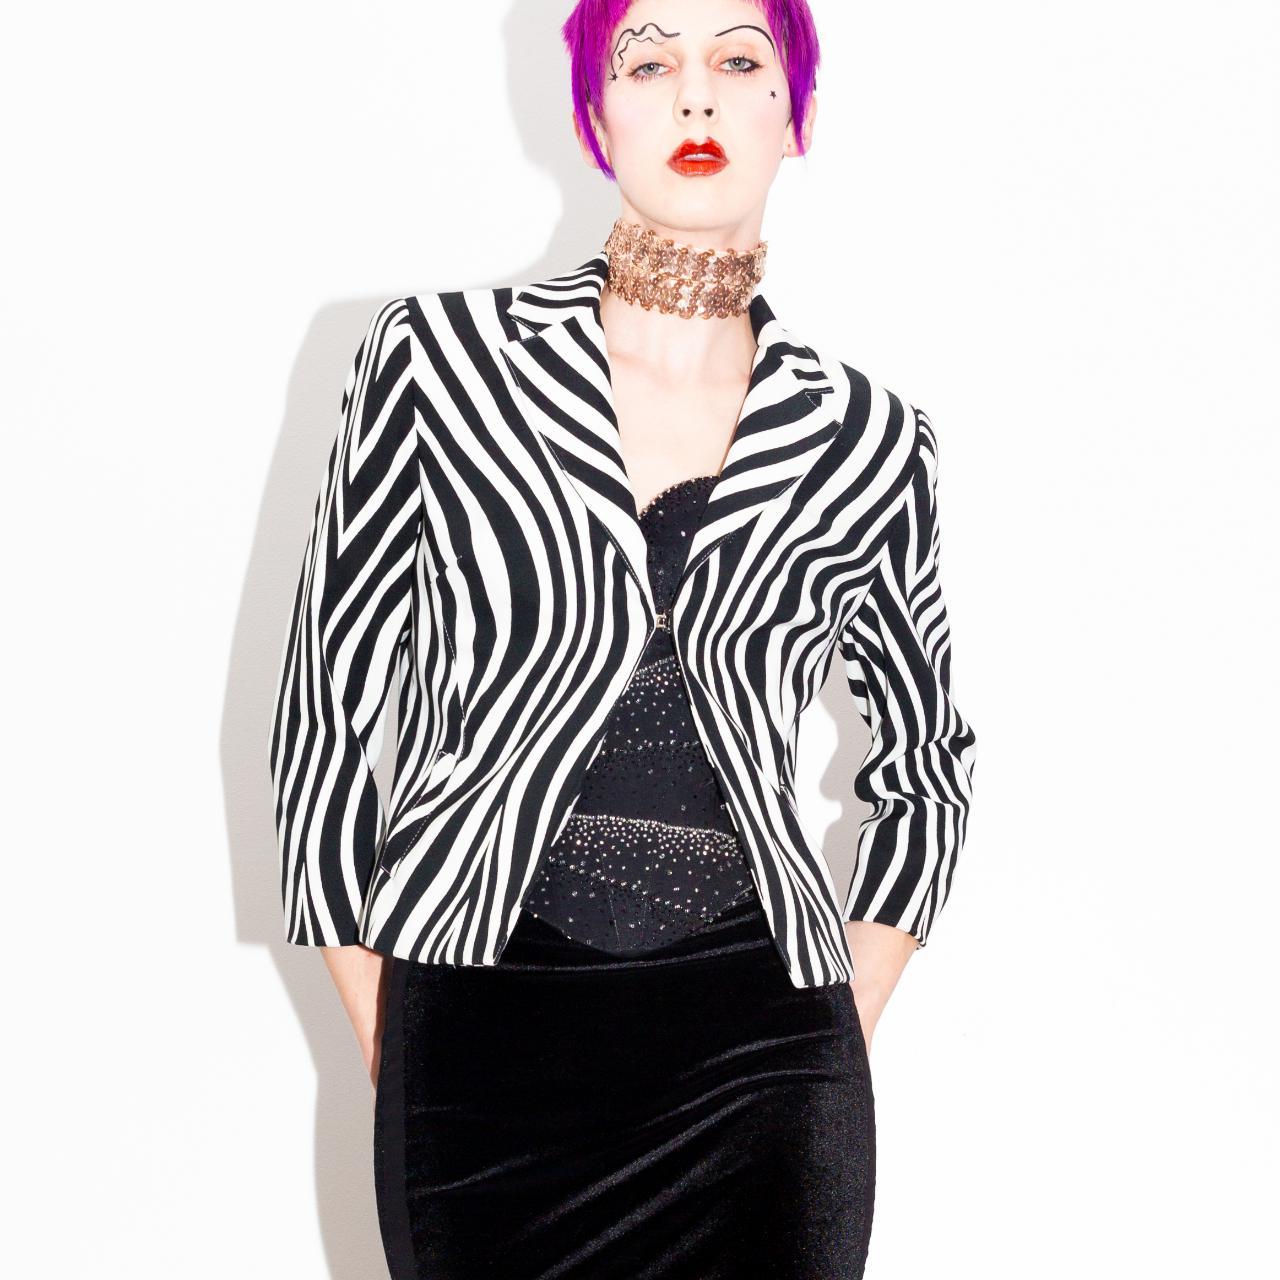 Product Image 3 - CRUELLA EAT YOUR HEART OUT
Black